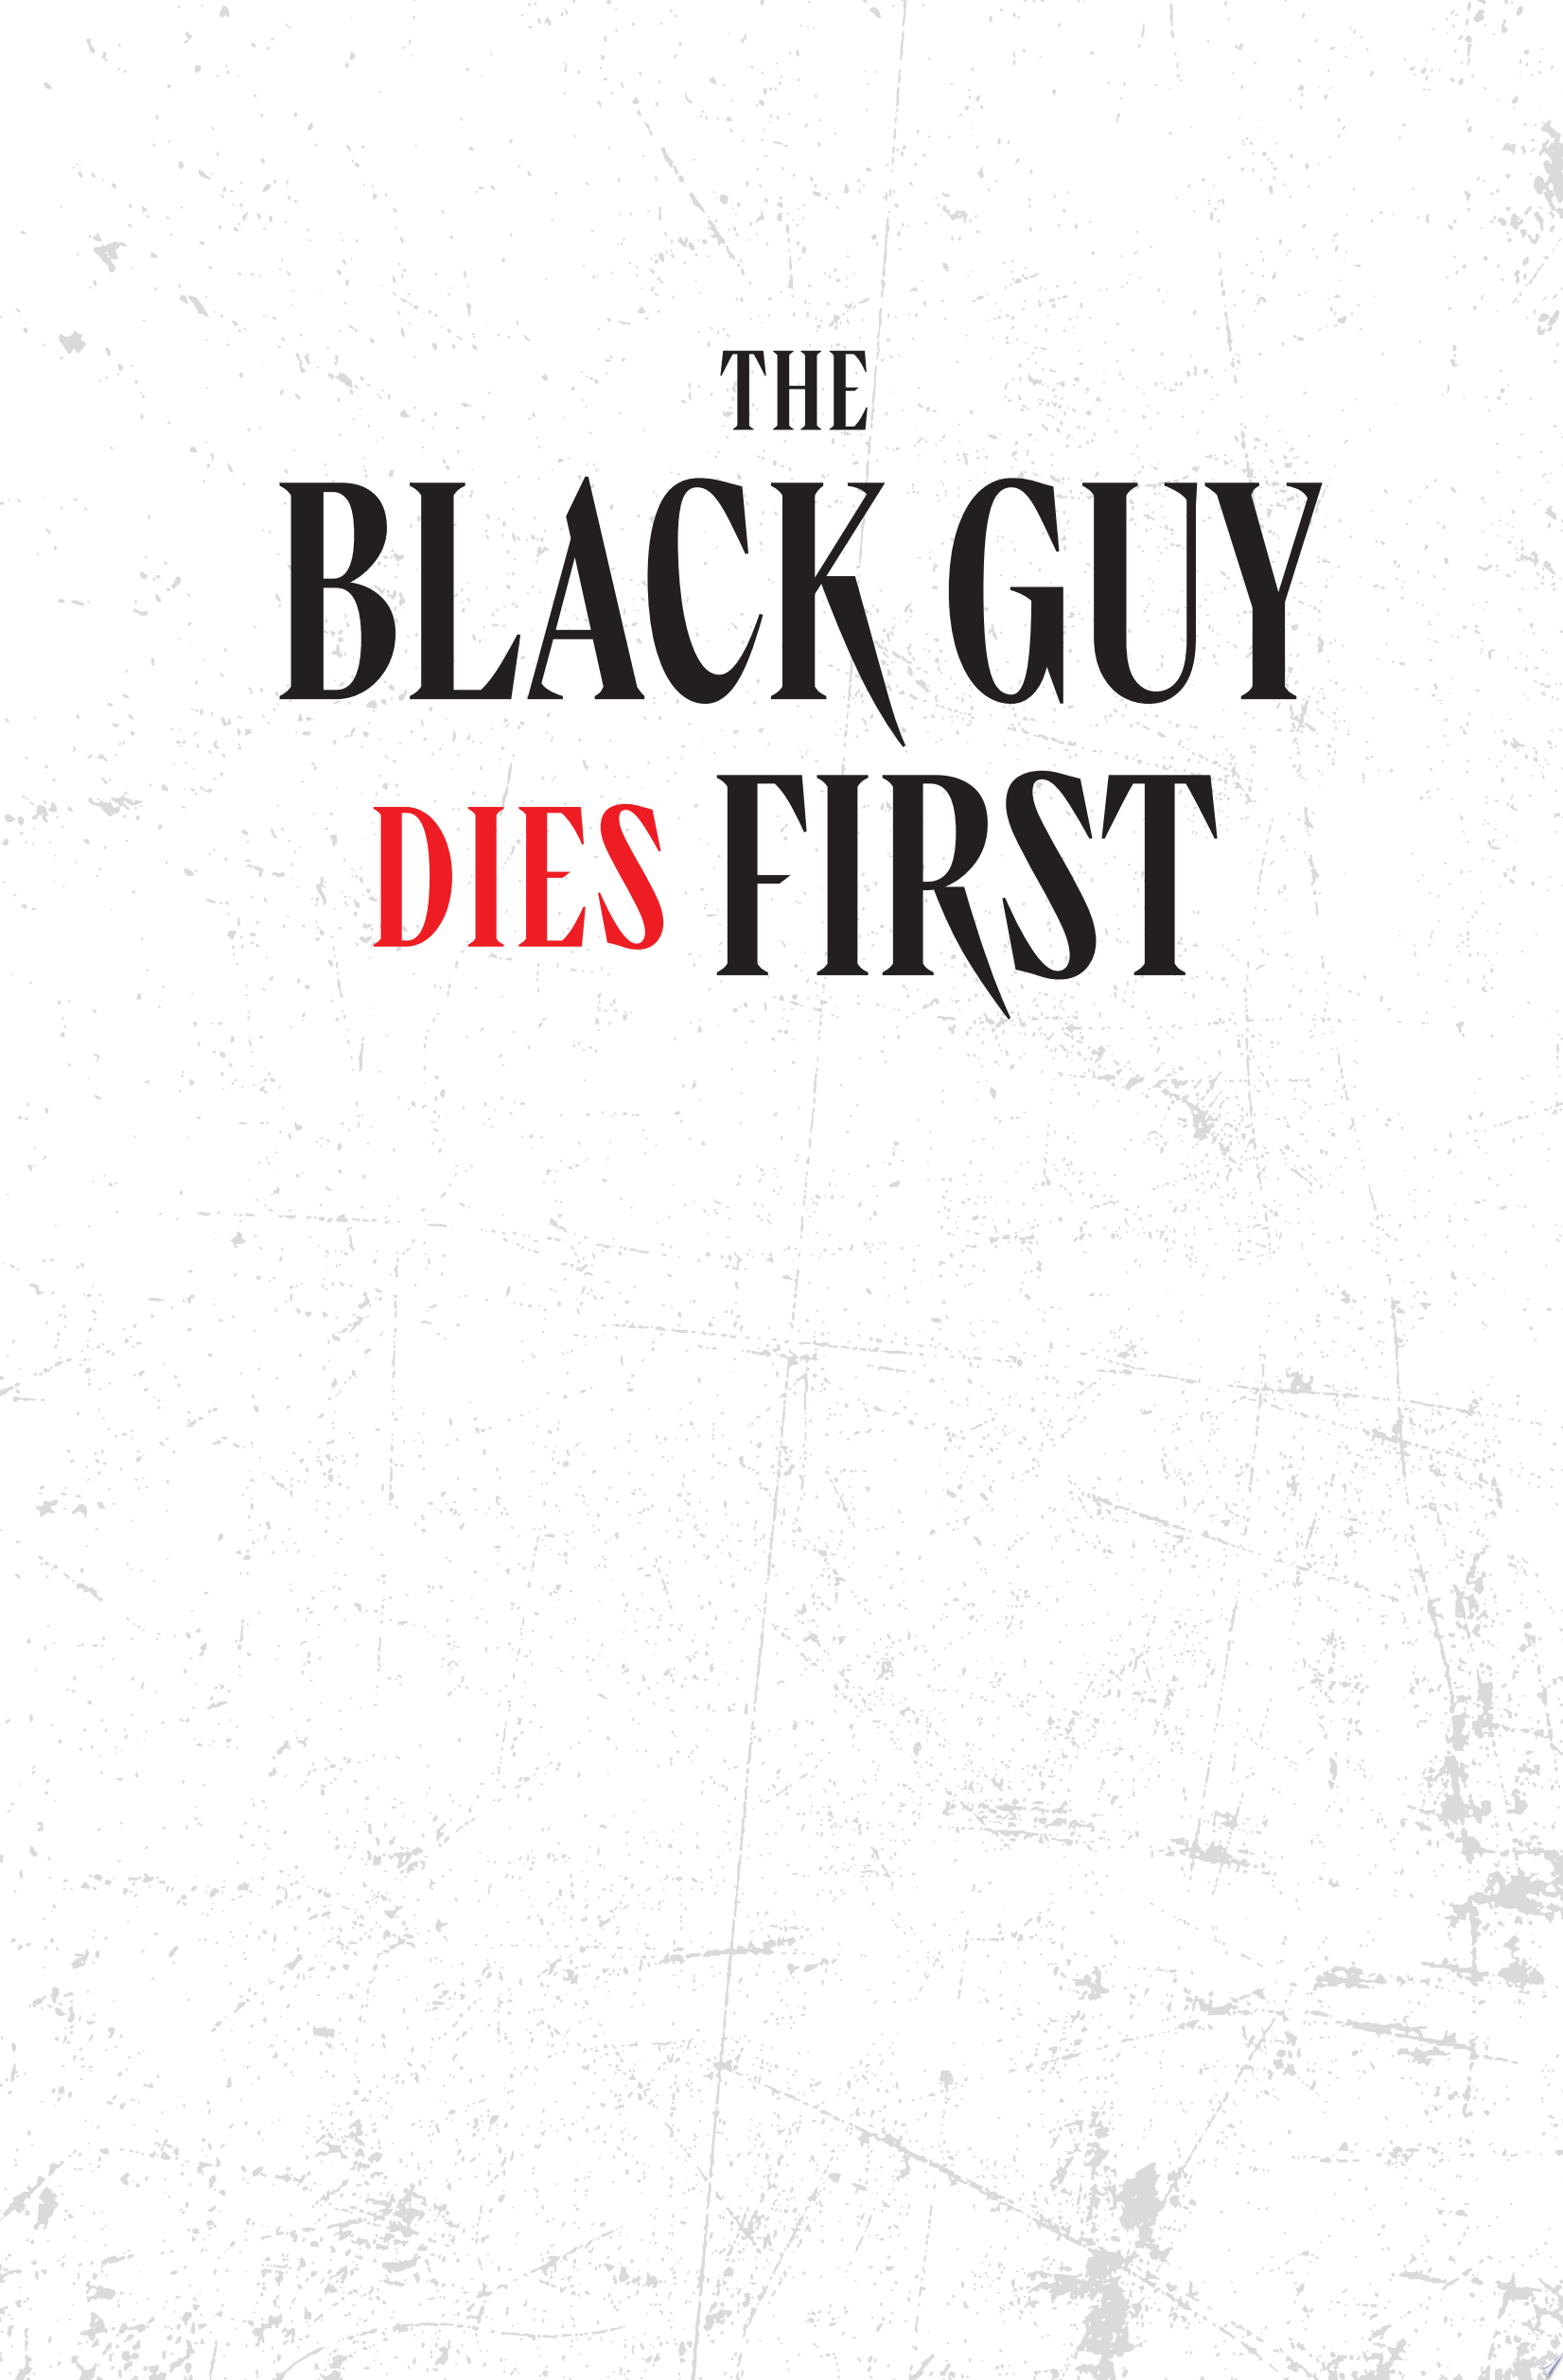 Image for "The Black Guy Dies First"